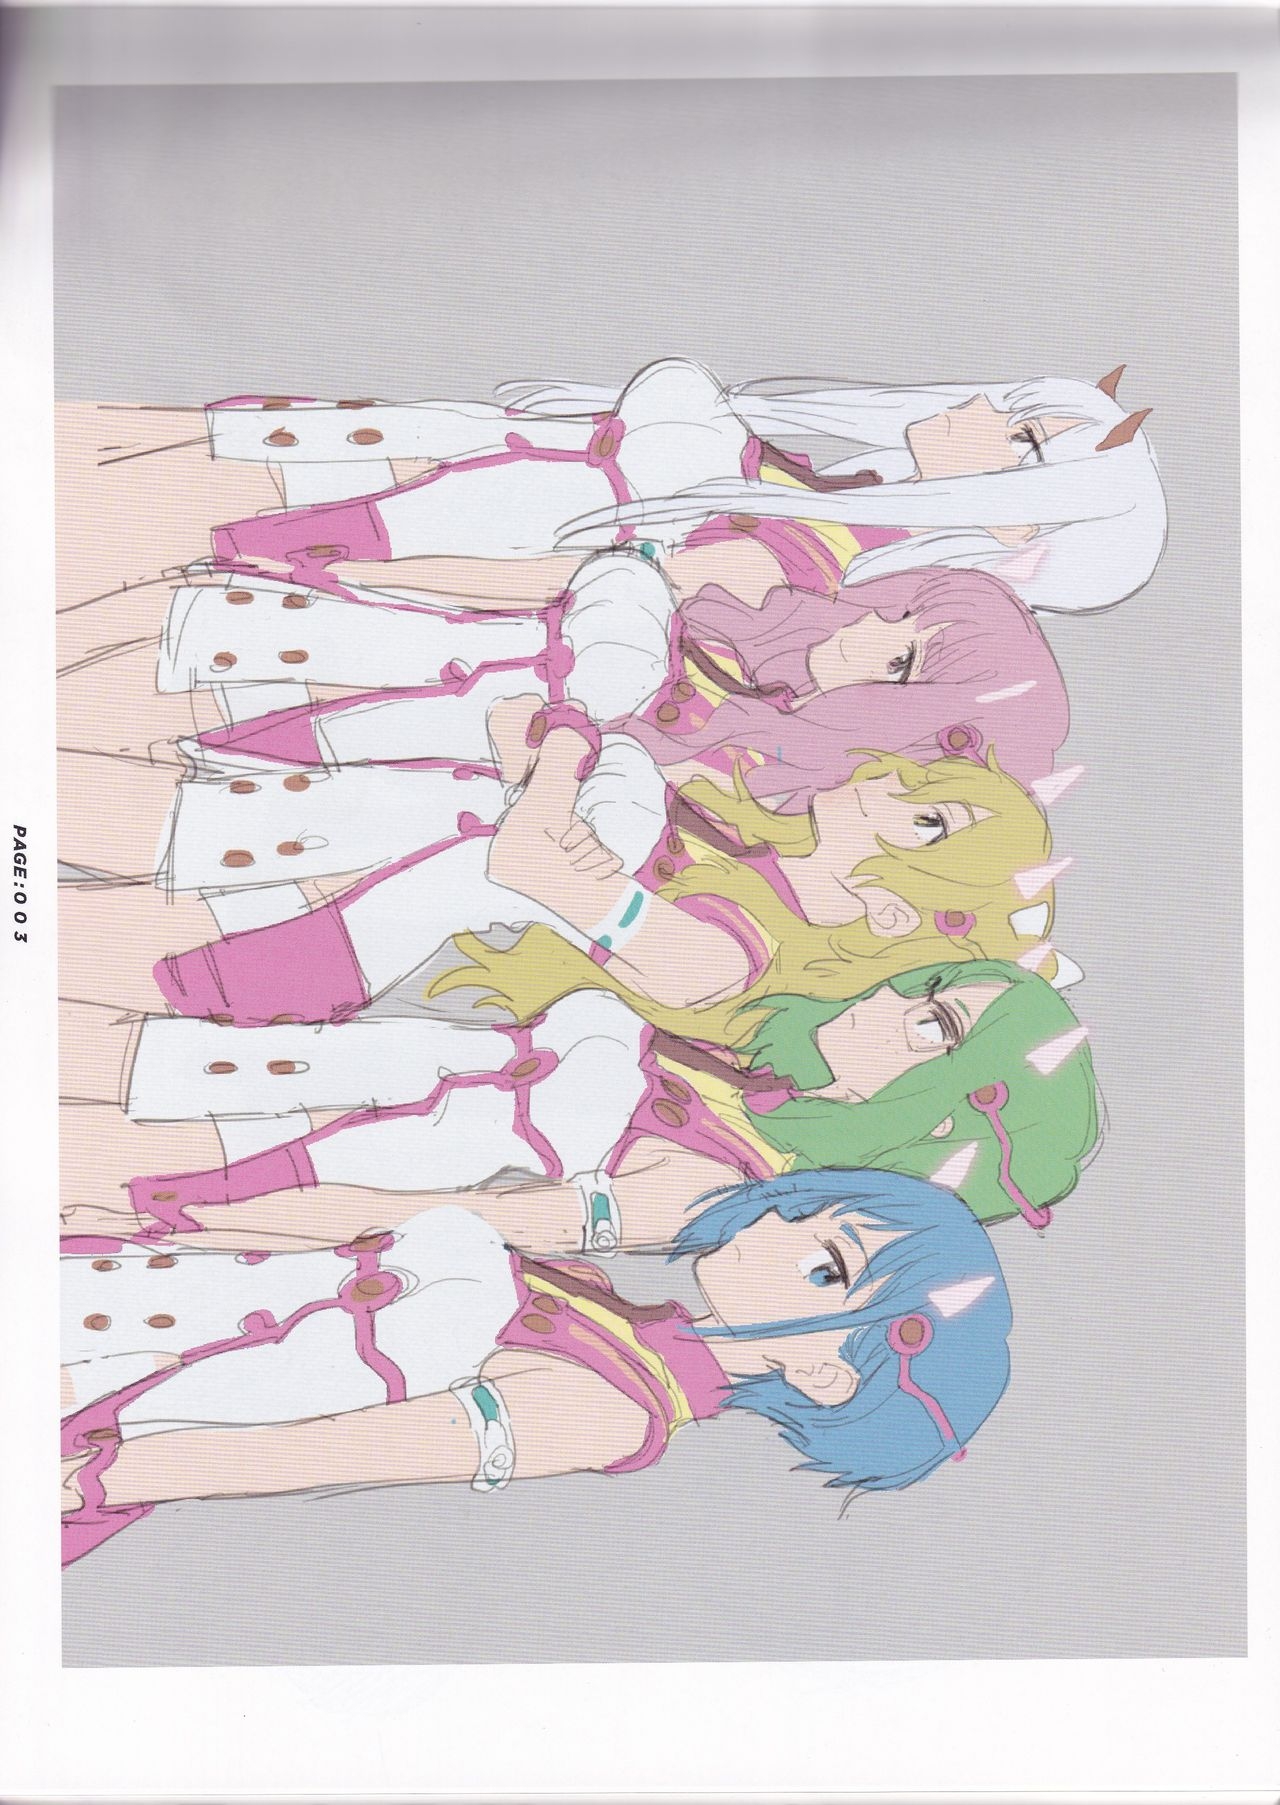 (C94) [Cemetery Hills High School (Various)] The Art of DiF Vol. X (DARLING in the FRANXX) 3